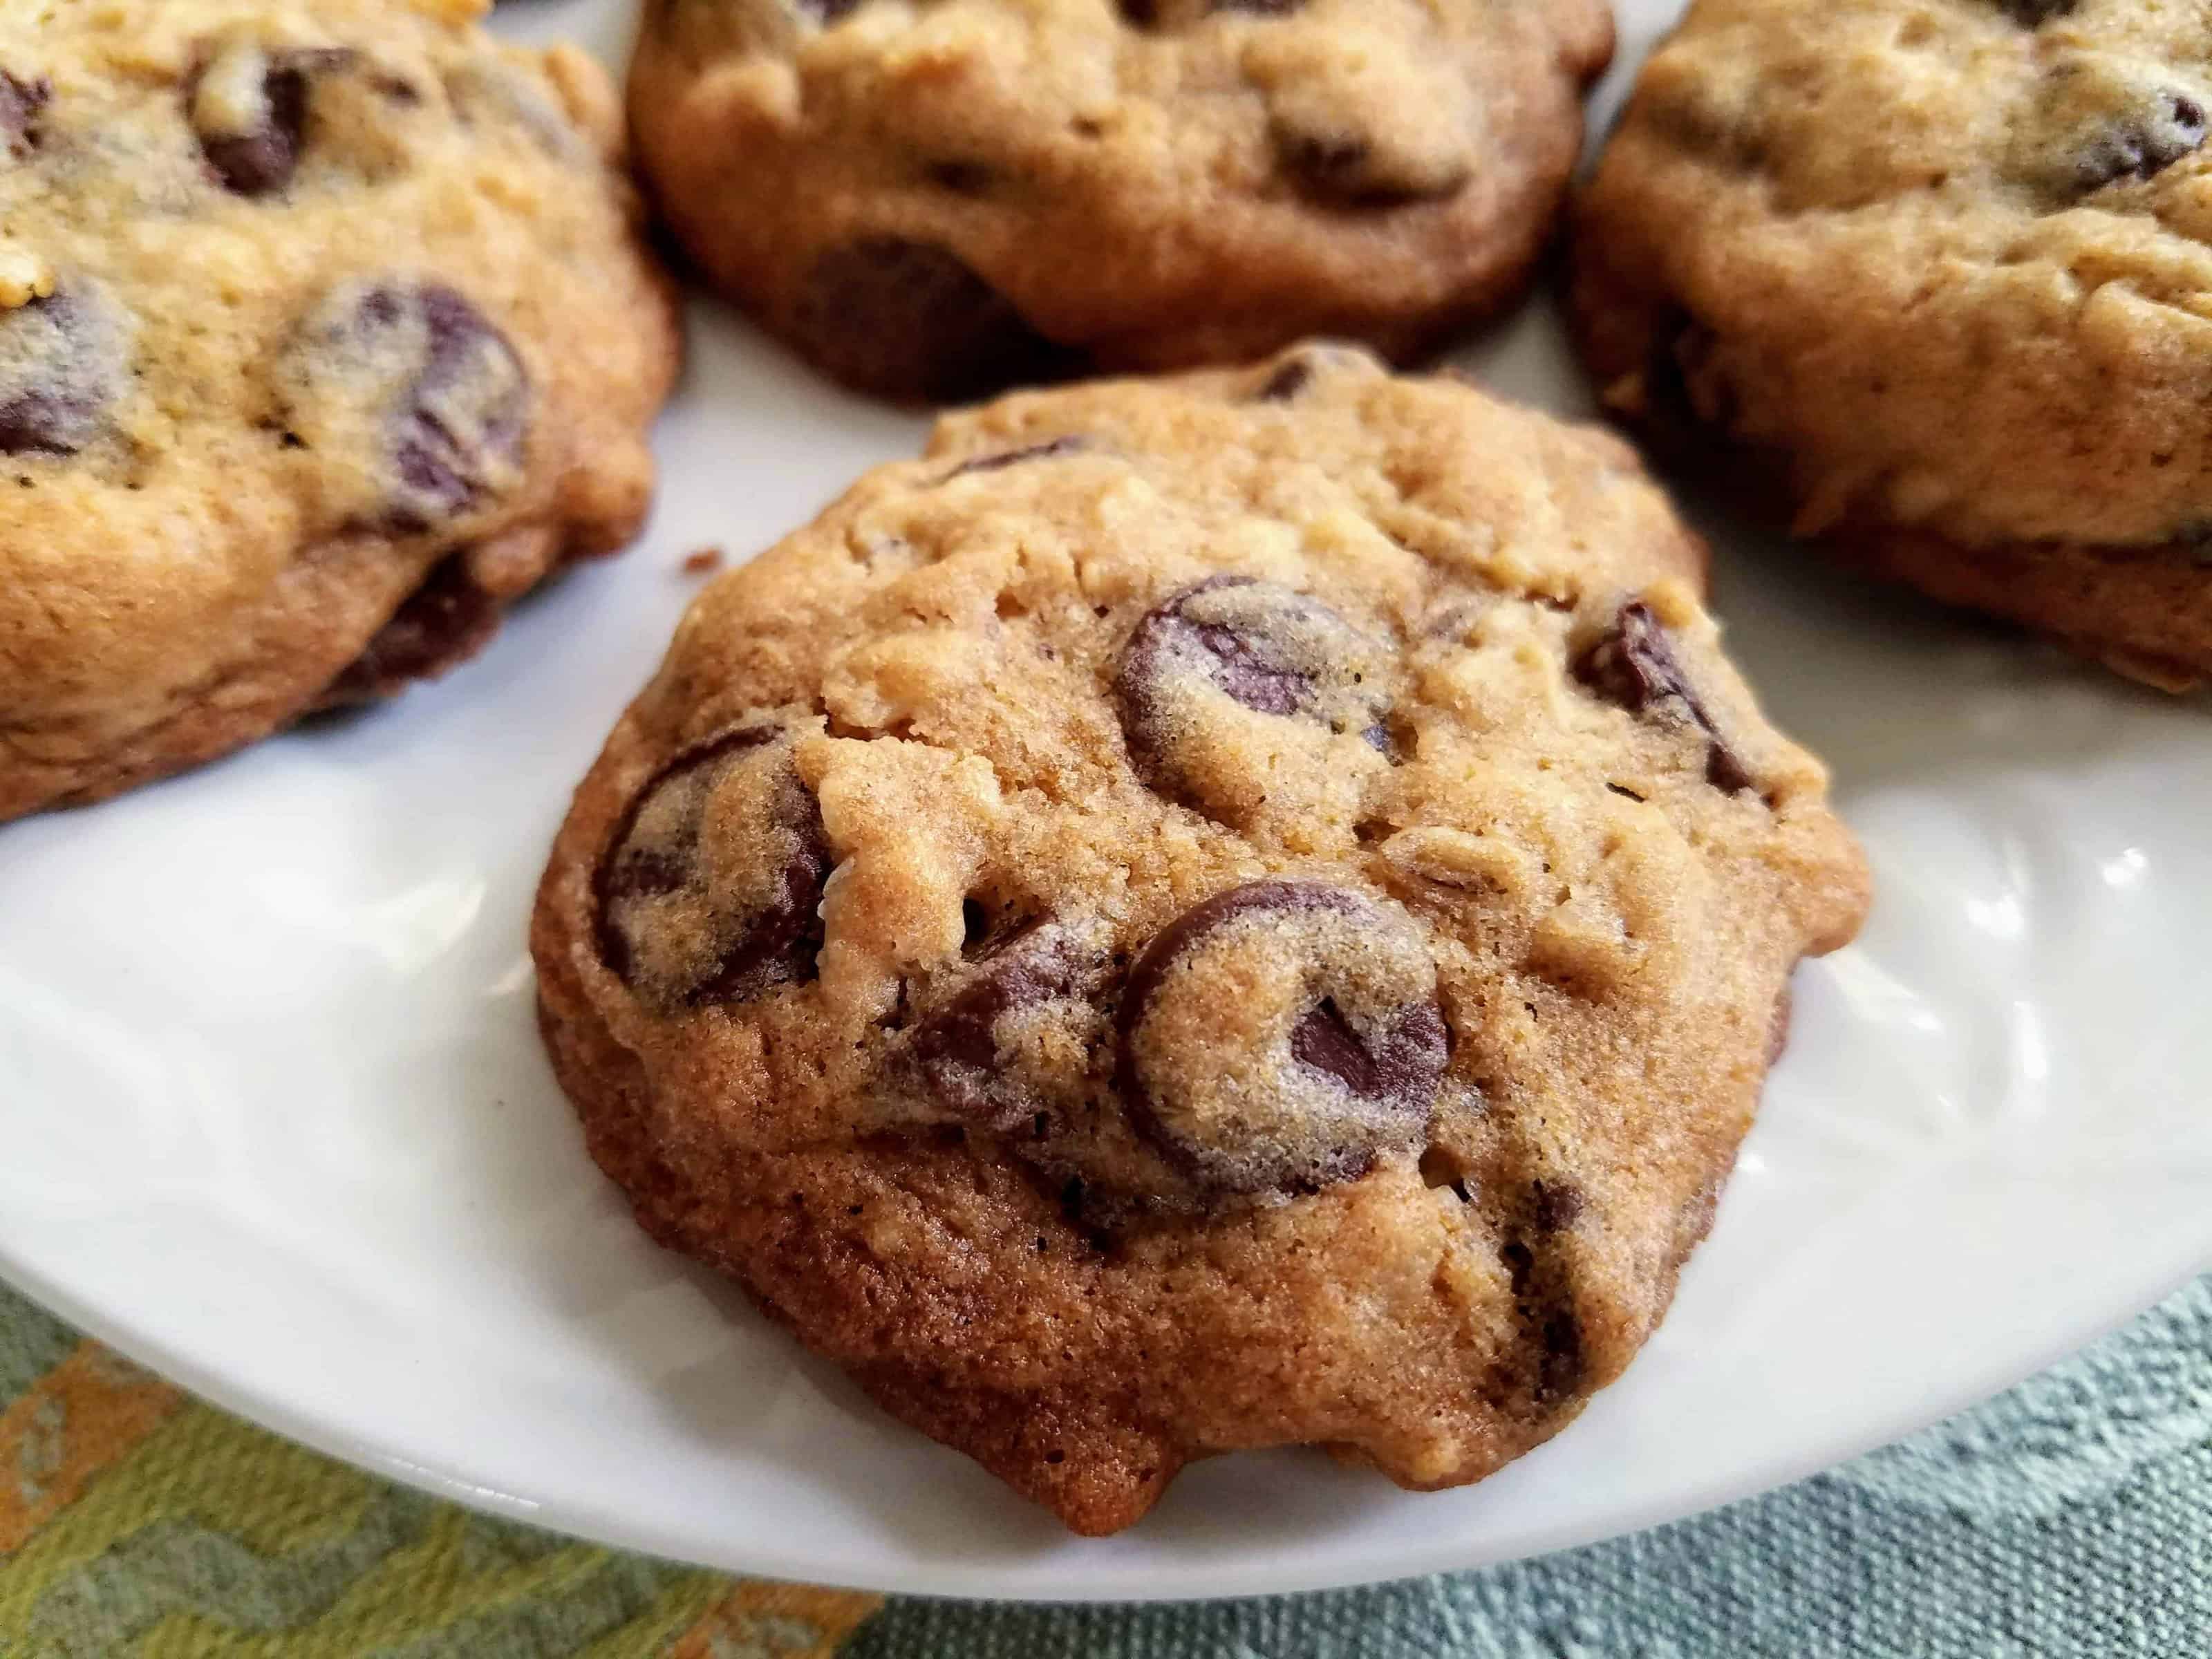 Soft and Chewy Oatmeal Chocolate Cookies will be your new favorite cookie! Packed with oatmeal and chocolate chips in every bite, it’s the best chewy cookie ever! #BakeBetterCookies #CollectiveBias #ChewyChocolateChipCookies via @Mooreorlesscook